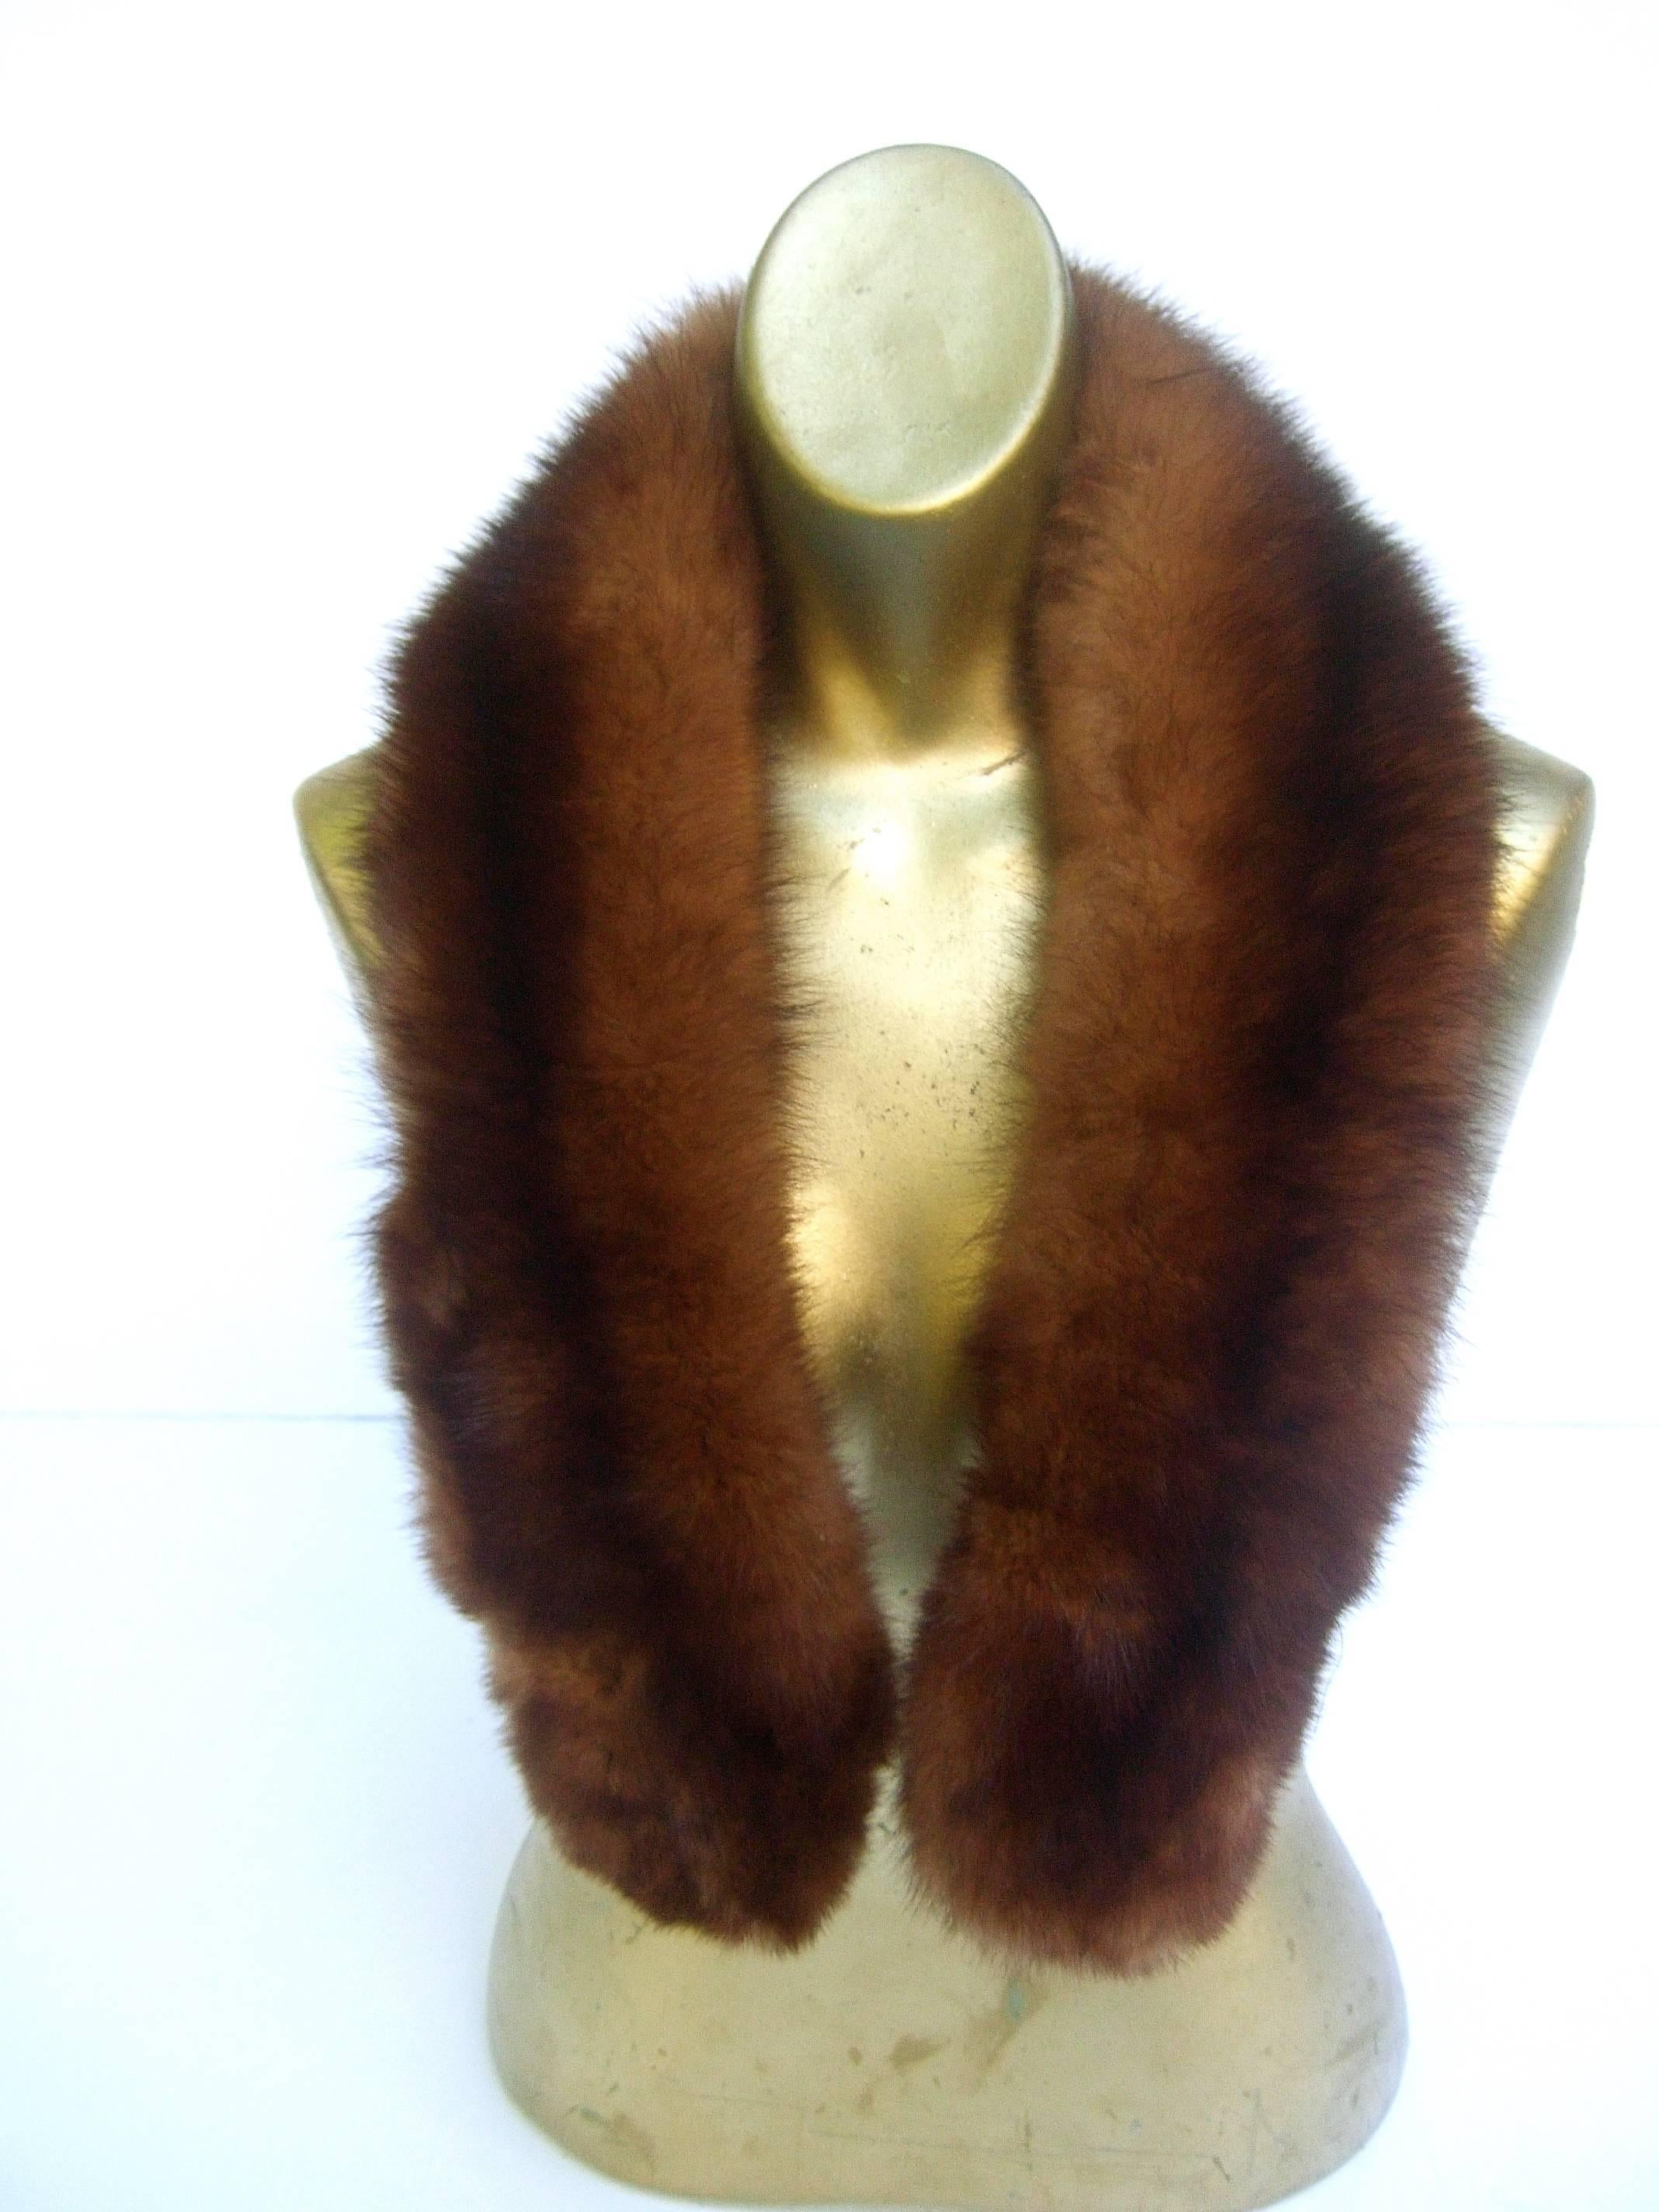 Luxurious plush sable fur collar c 1960
The fluffy mahogany brown sable fur collar
adds a dash of elegance draped over a coat,
 jacket lapel or cardigan

The back side is lined with a black velvet
band designed with a pair of clamps on each